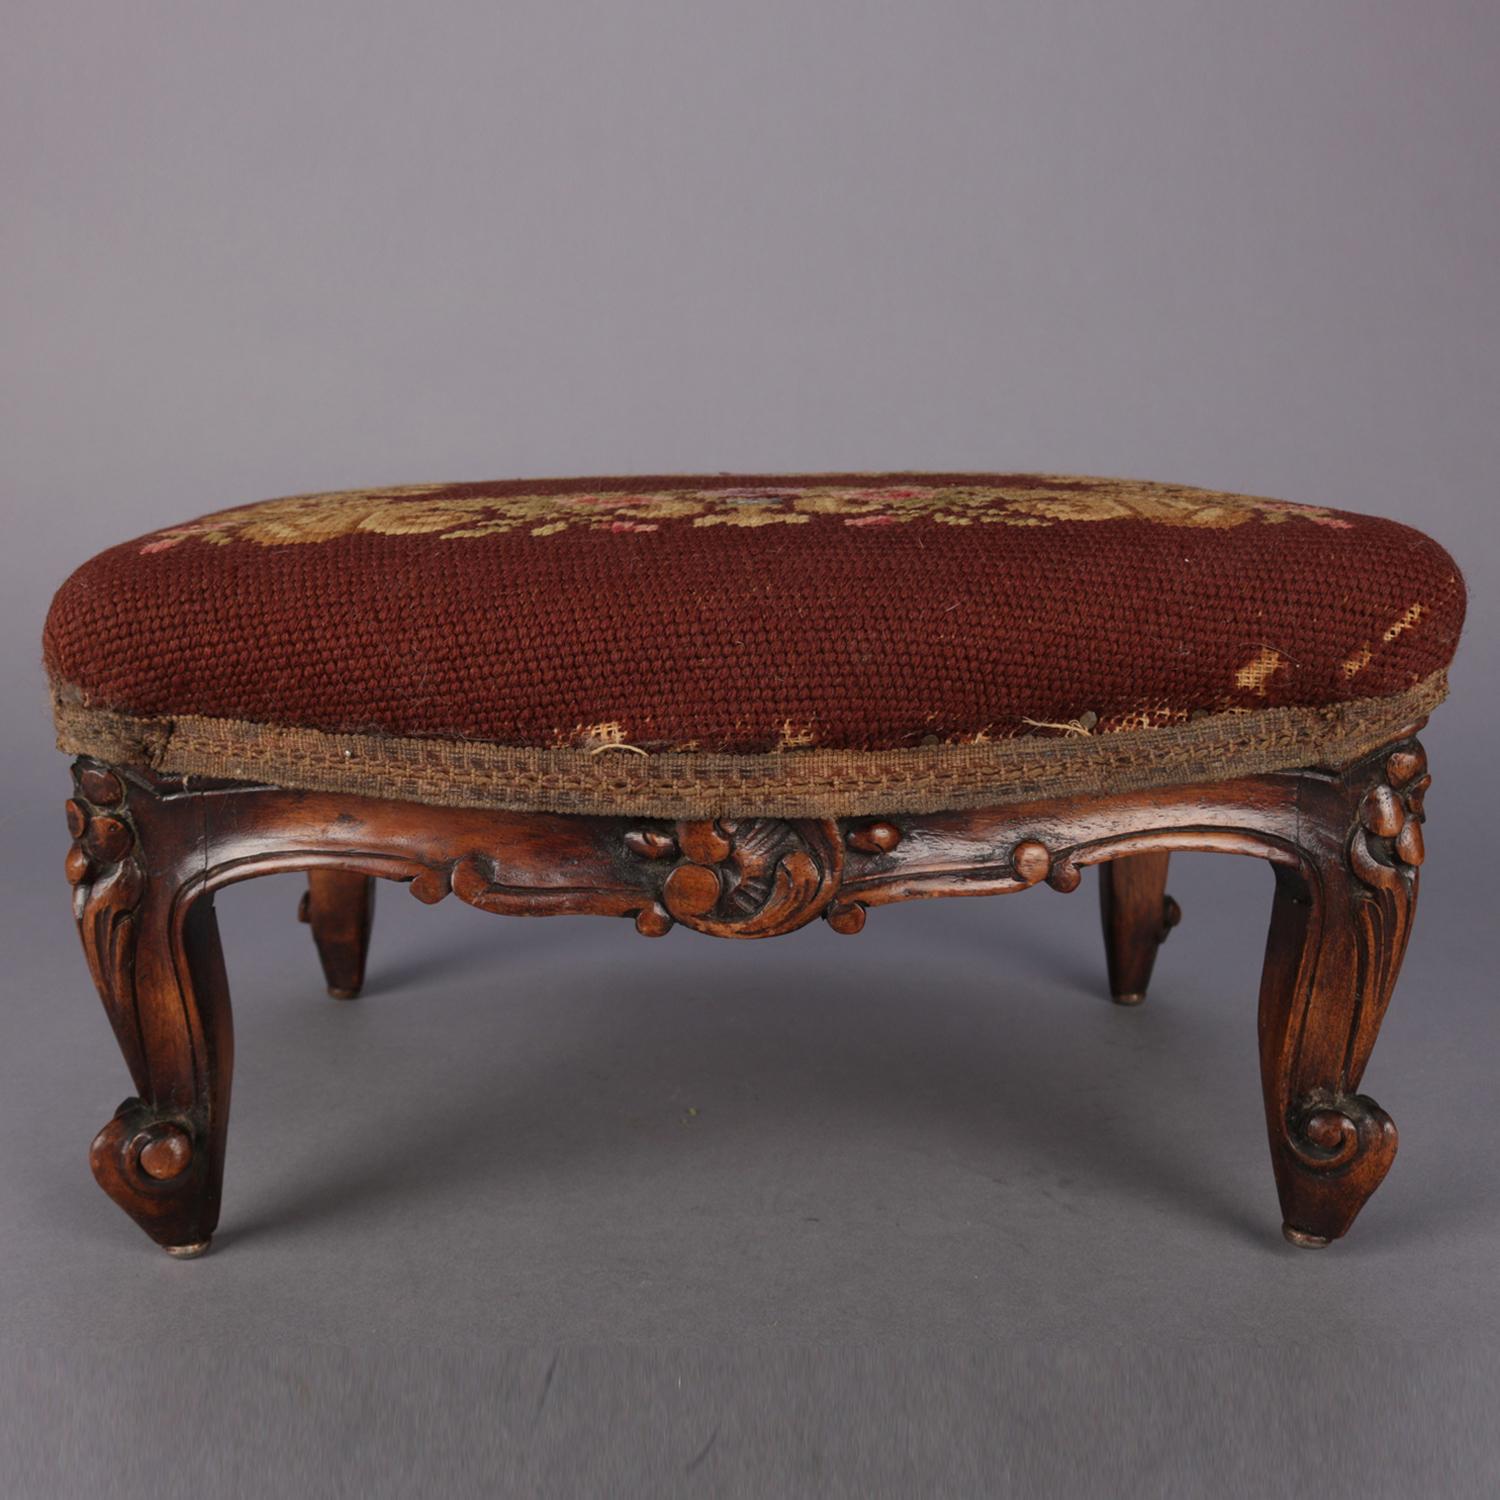 An antique French Louis XV footstool featuring mahogany base having carved foliate, floral and scroll design, raised on cabriole legs terminating in scroll feet, tapestry cushion with needlepoint floral and foliate design, circa 1890.

***DELIVERY